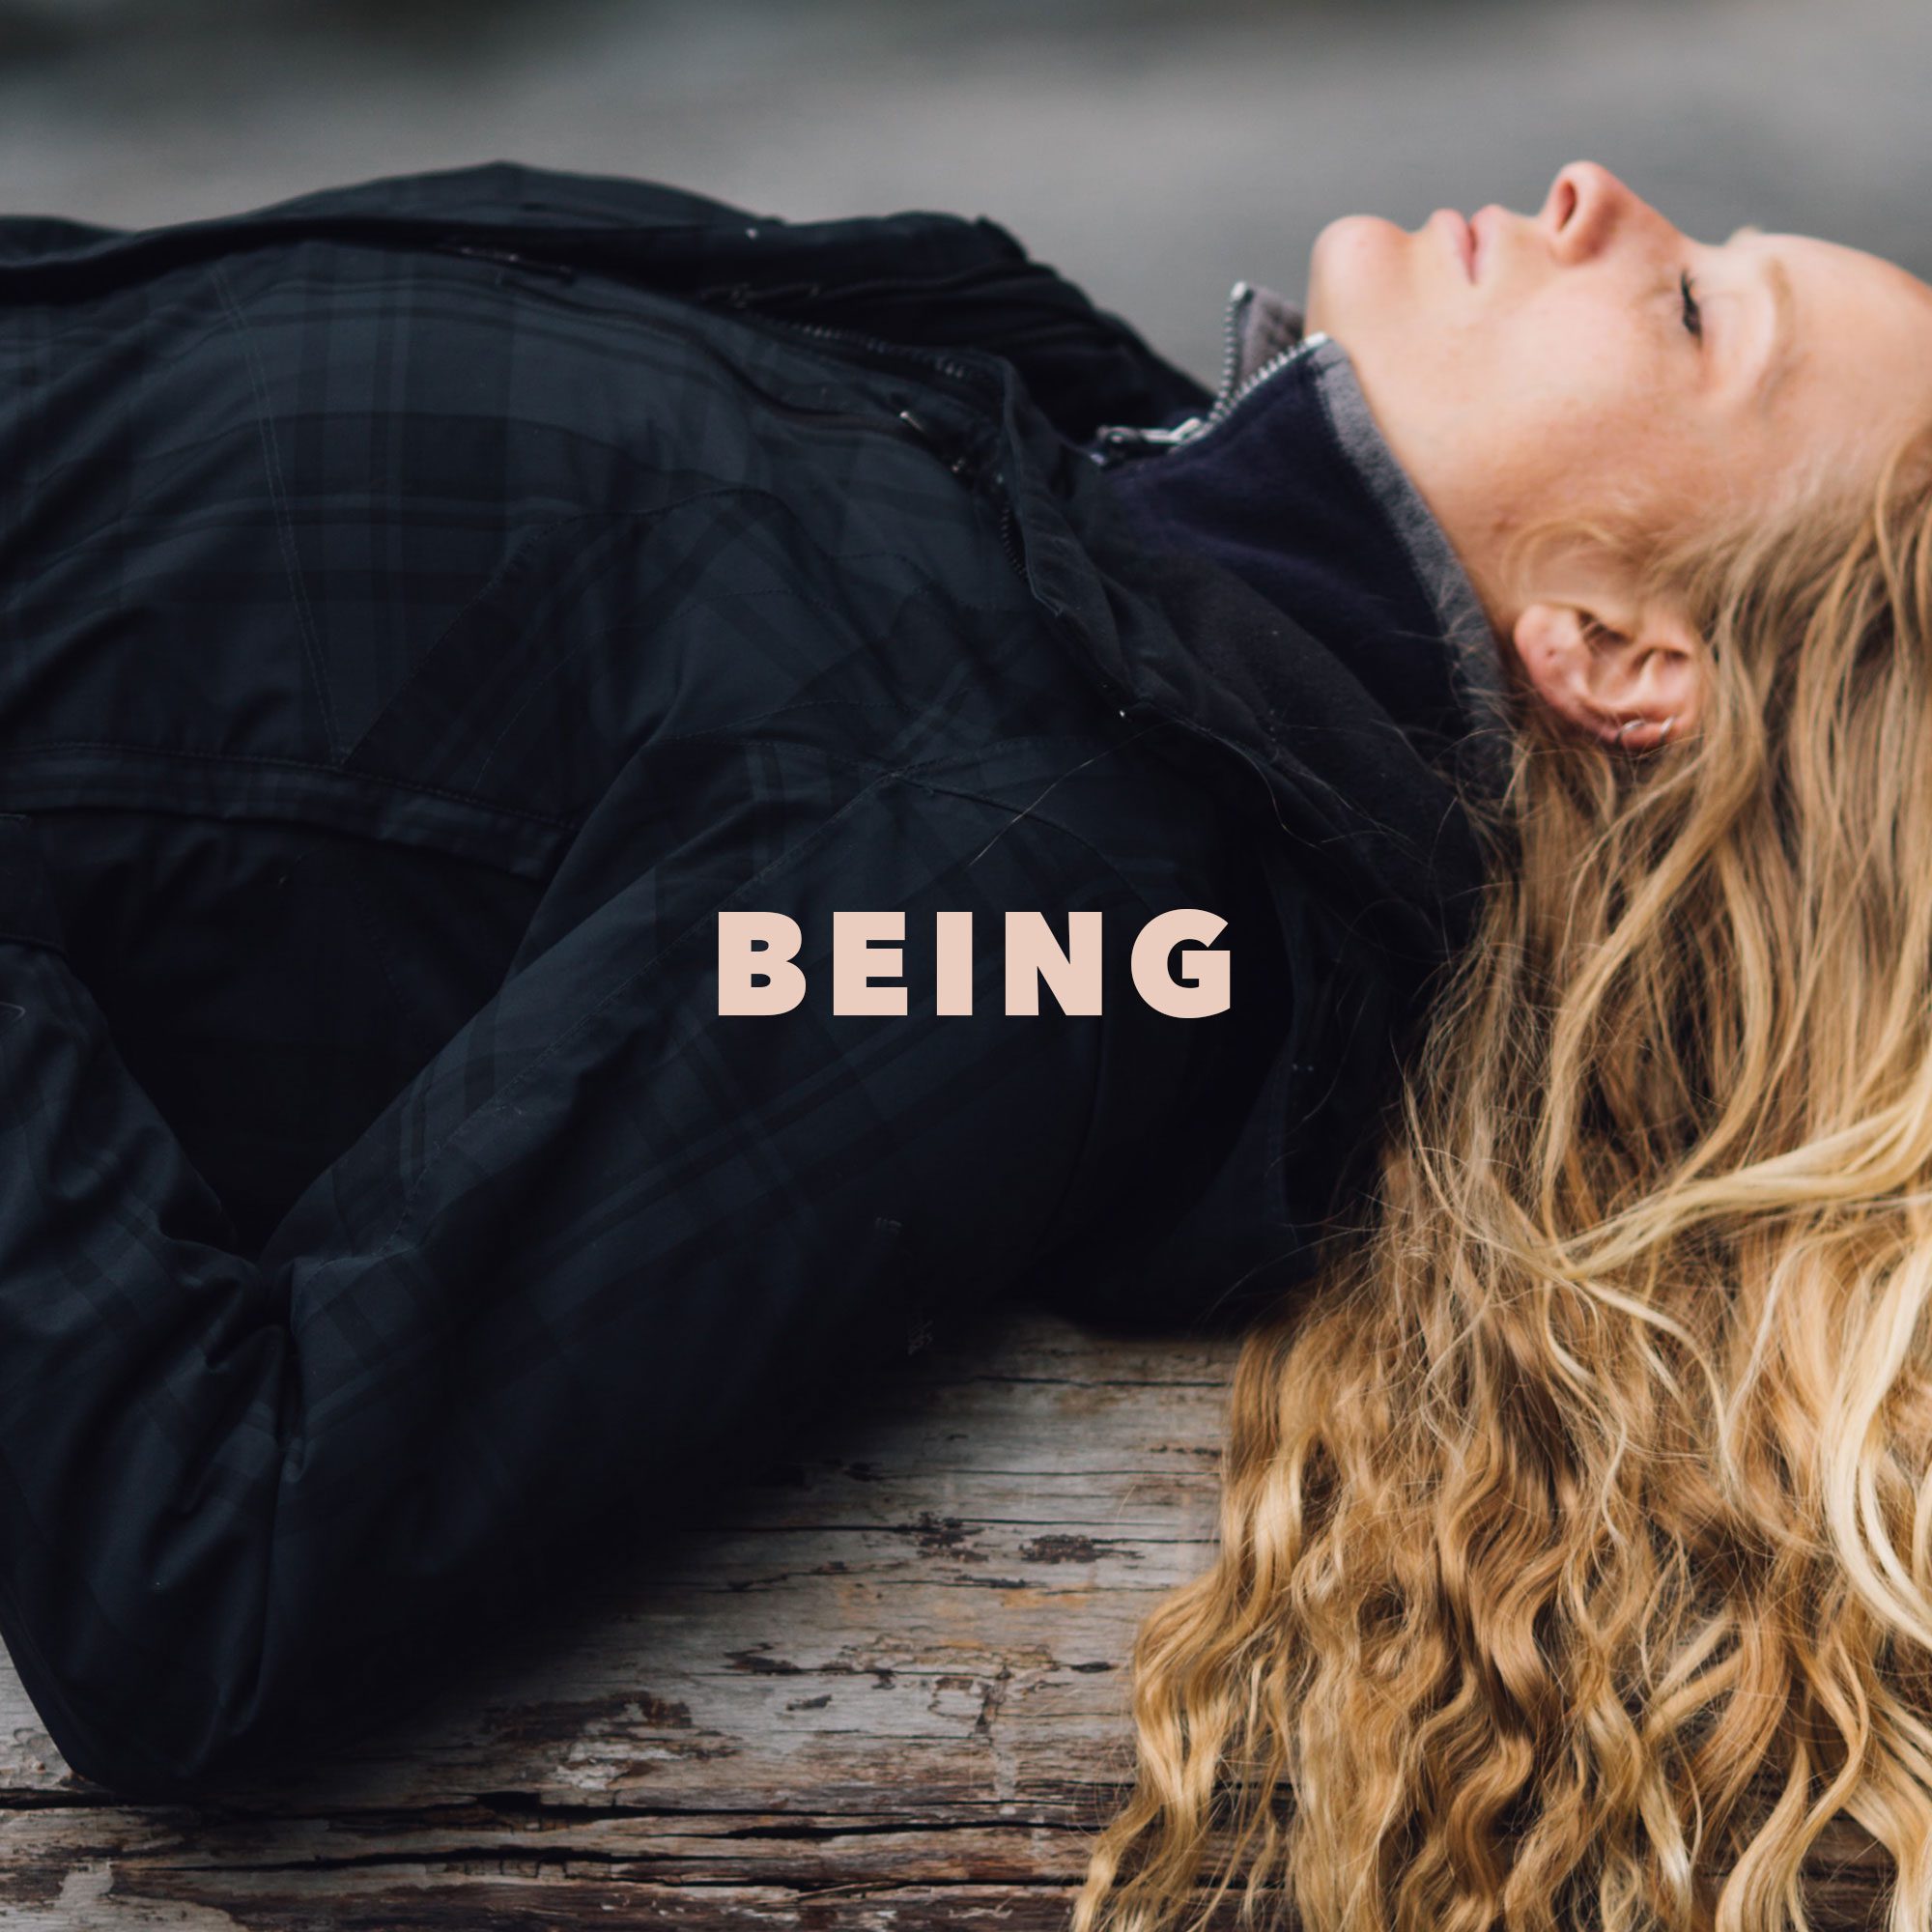 🧘 BEING – noticing what is